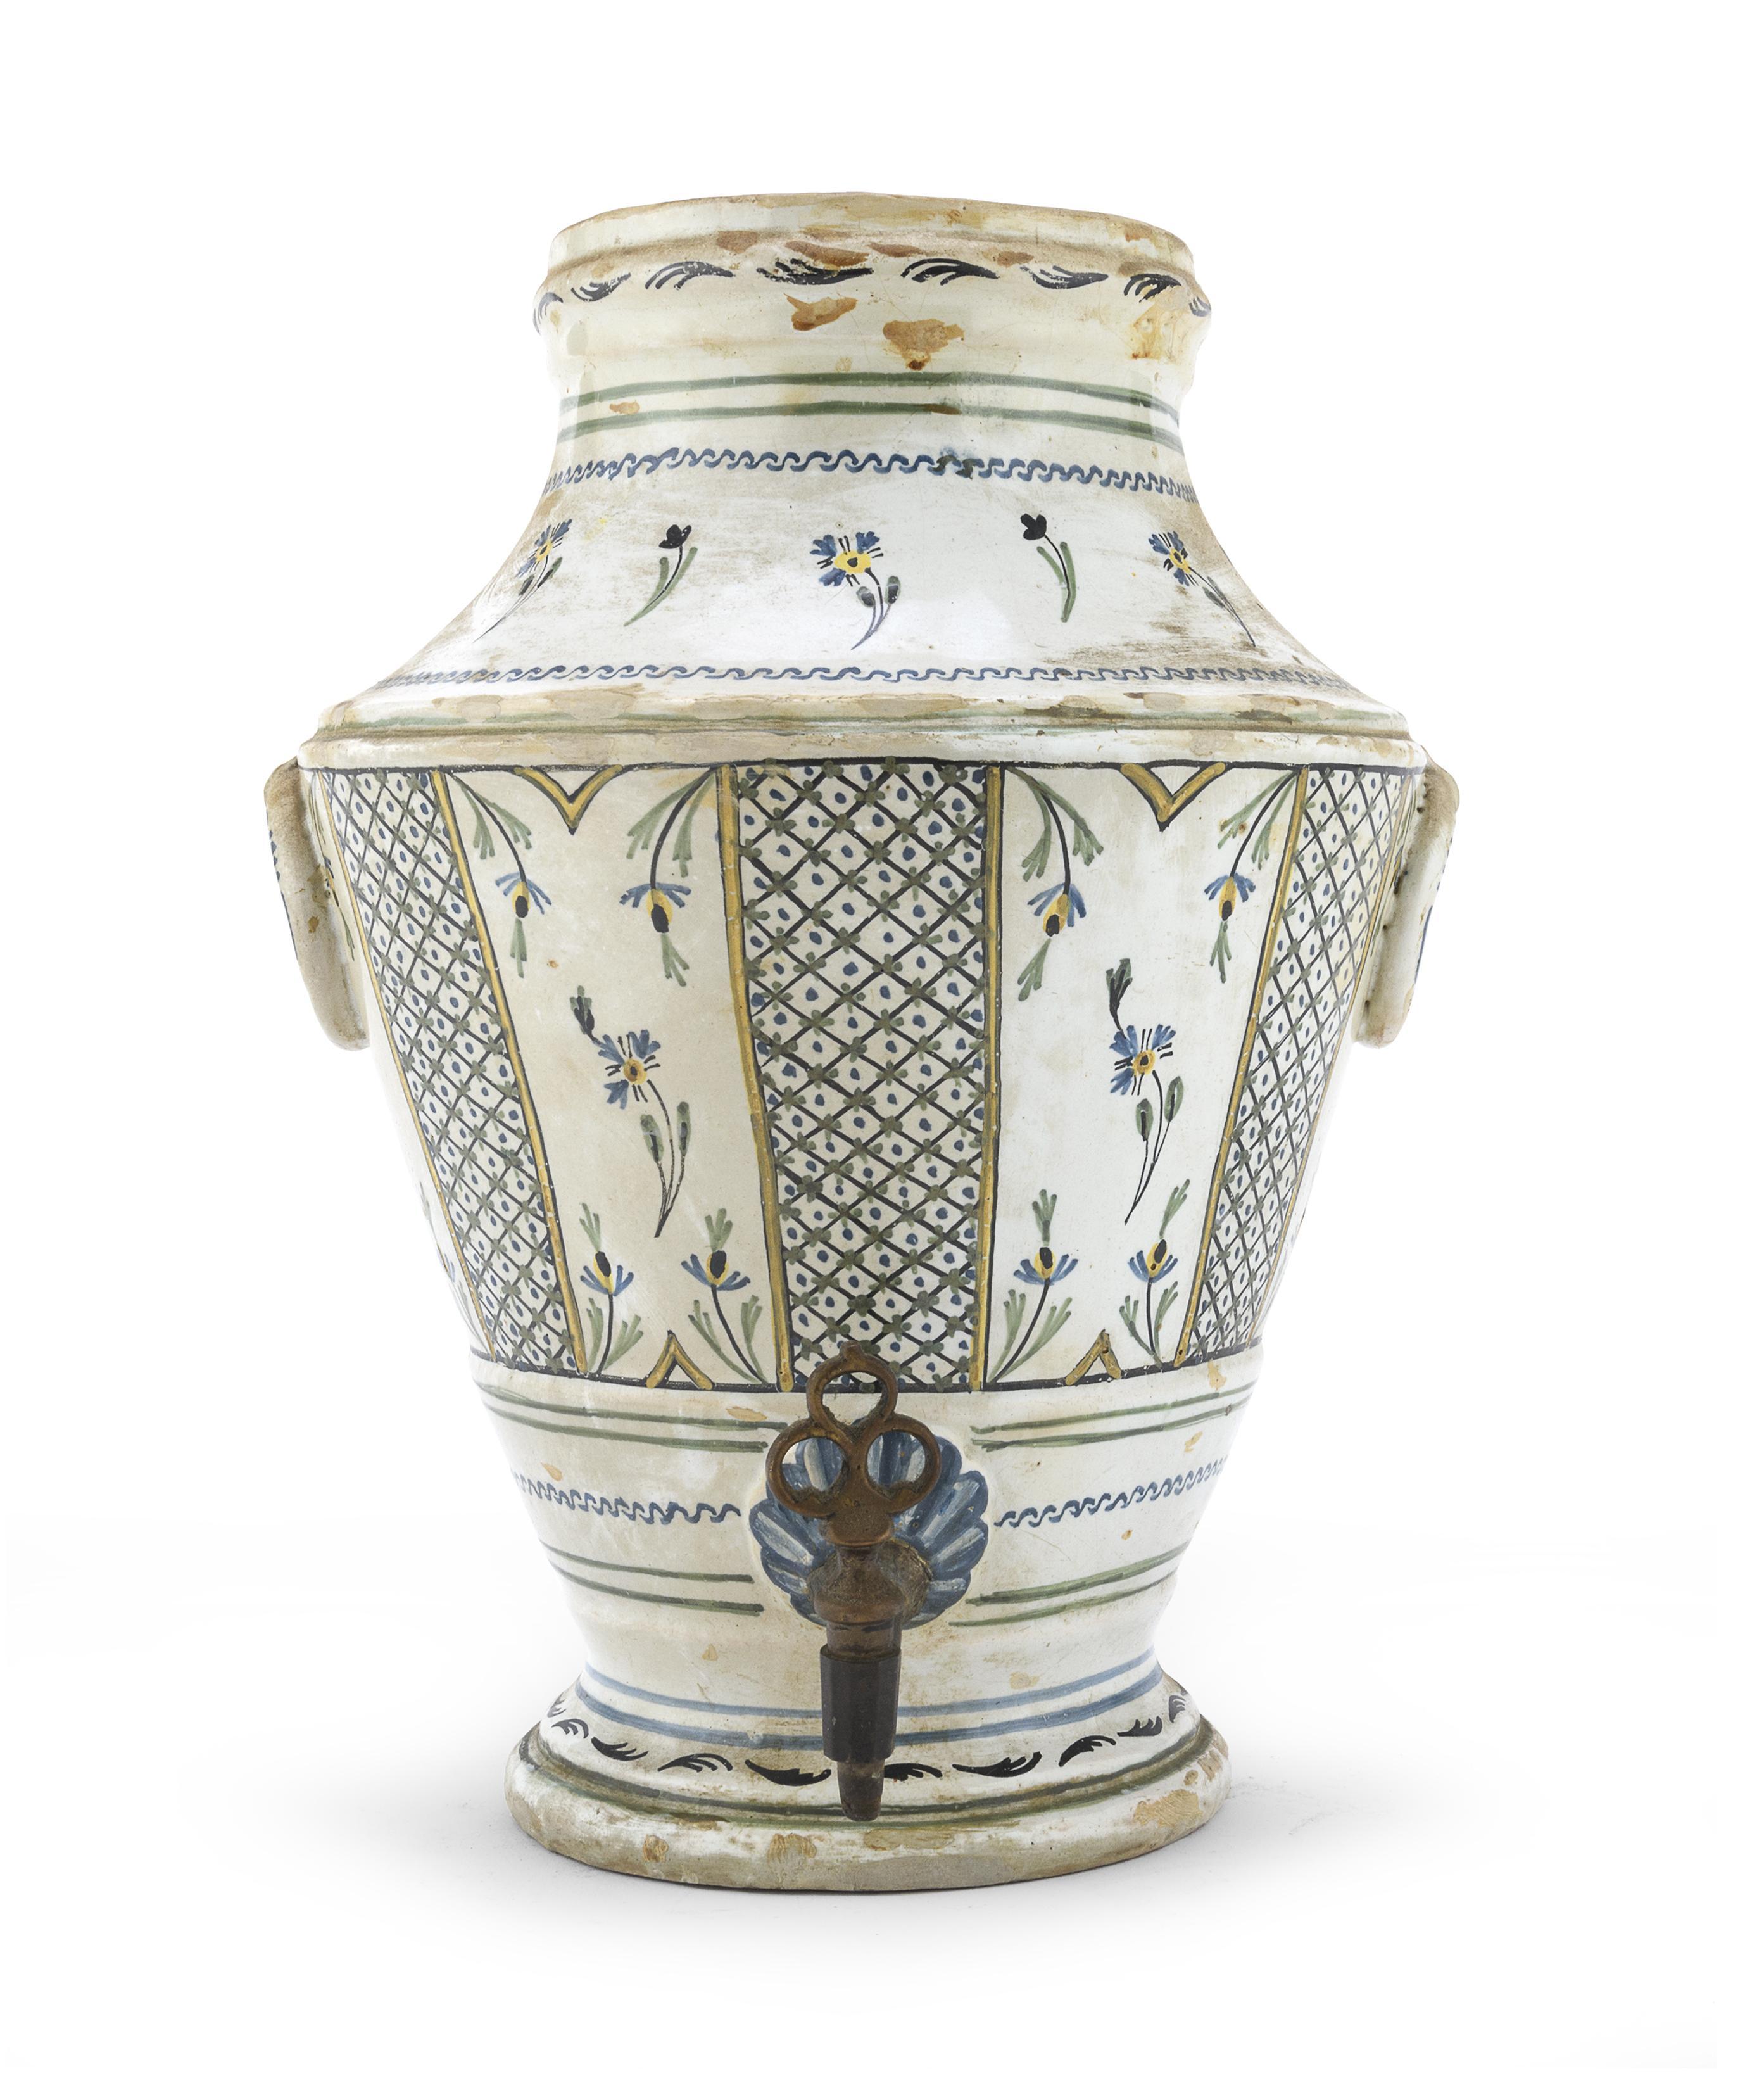 Anonymous
Mid-18th century; probably Moustiers or Nevers, France
Faience and brass

Approximate size: 12.25 (h) x 9 (w) x 6.25 (d) inches

The present dispenser was either used as a water or wine cooler or possibly for washing hands. The original